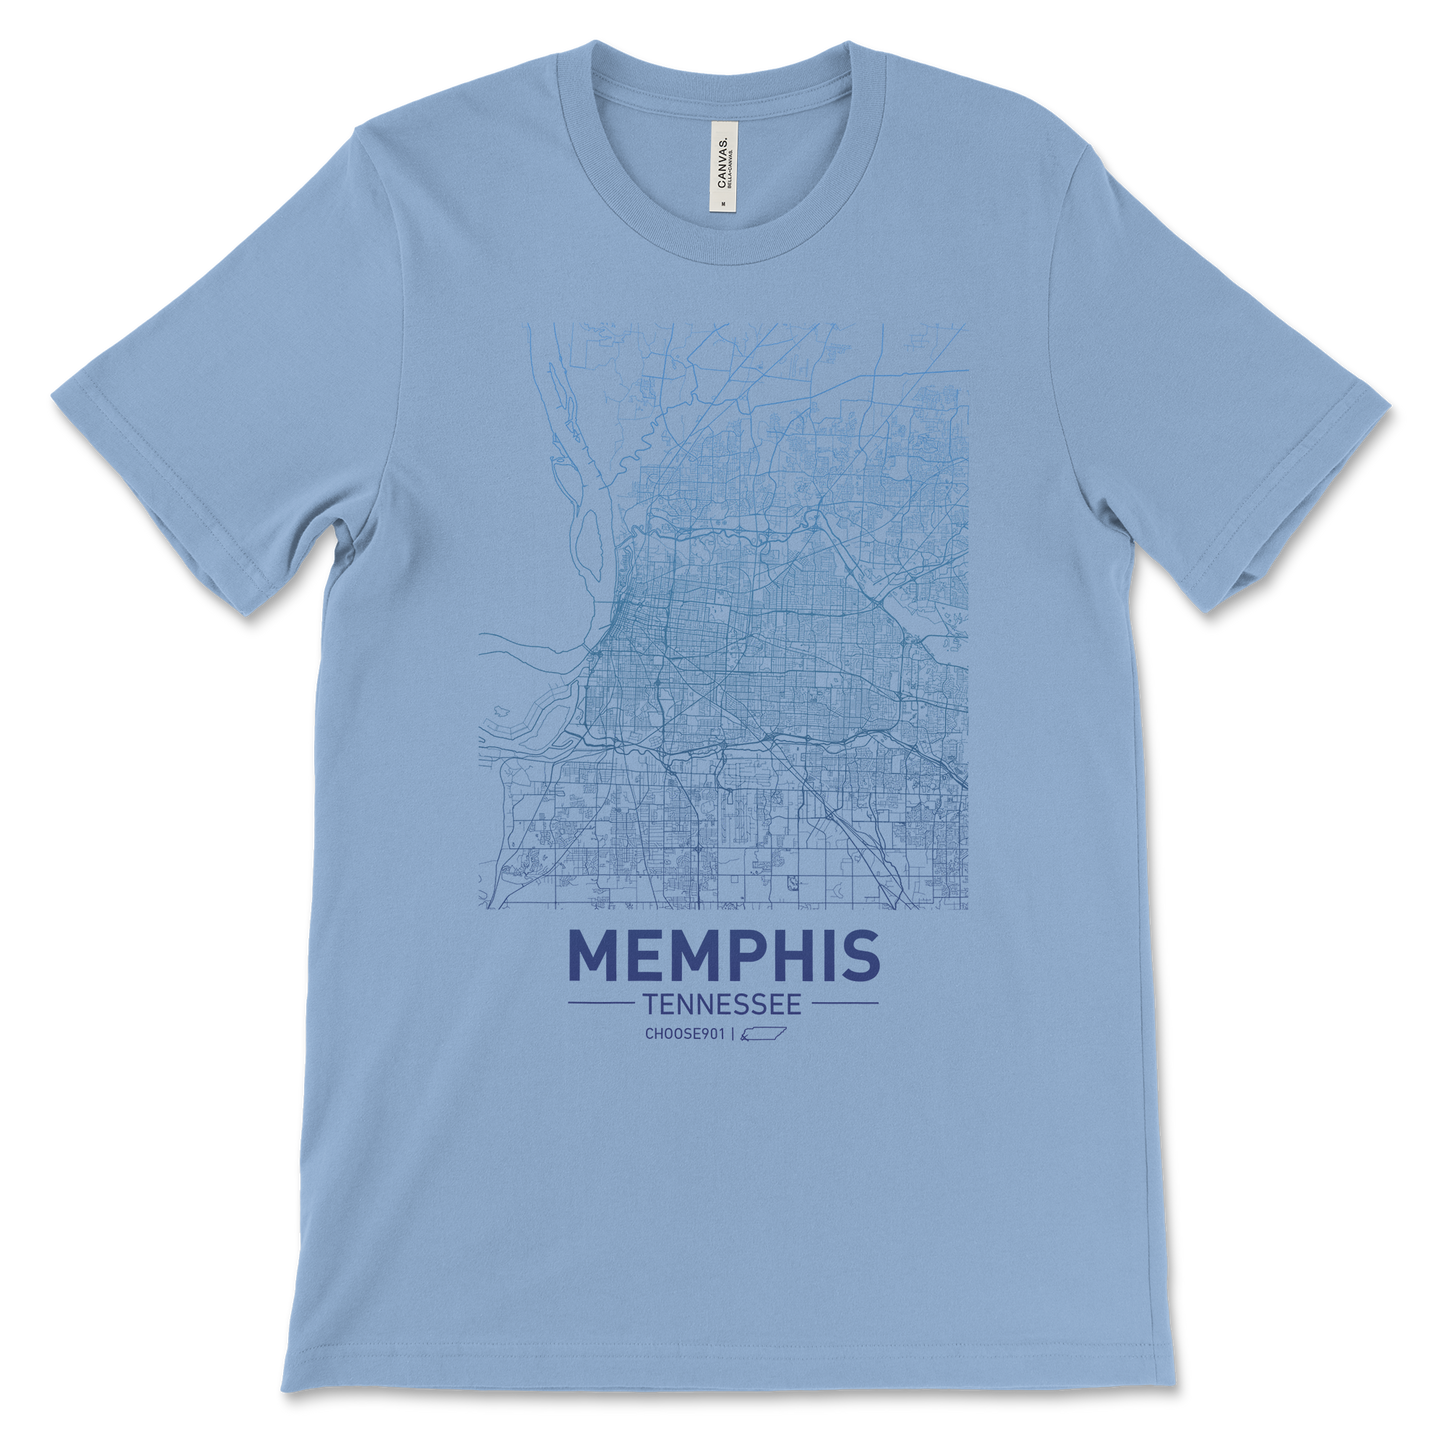 Carolina Blue Choose901 Memphis Map Shirt featuring a detailed street map of Memphis, Tennessee in white on the chest area.